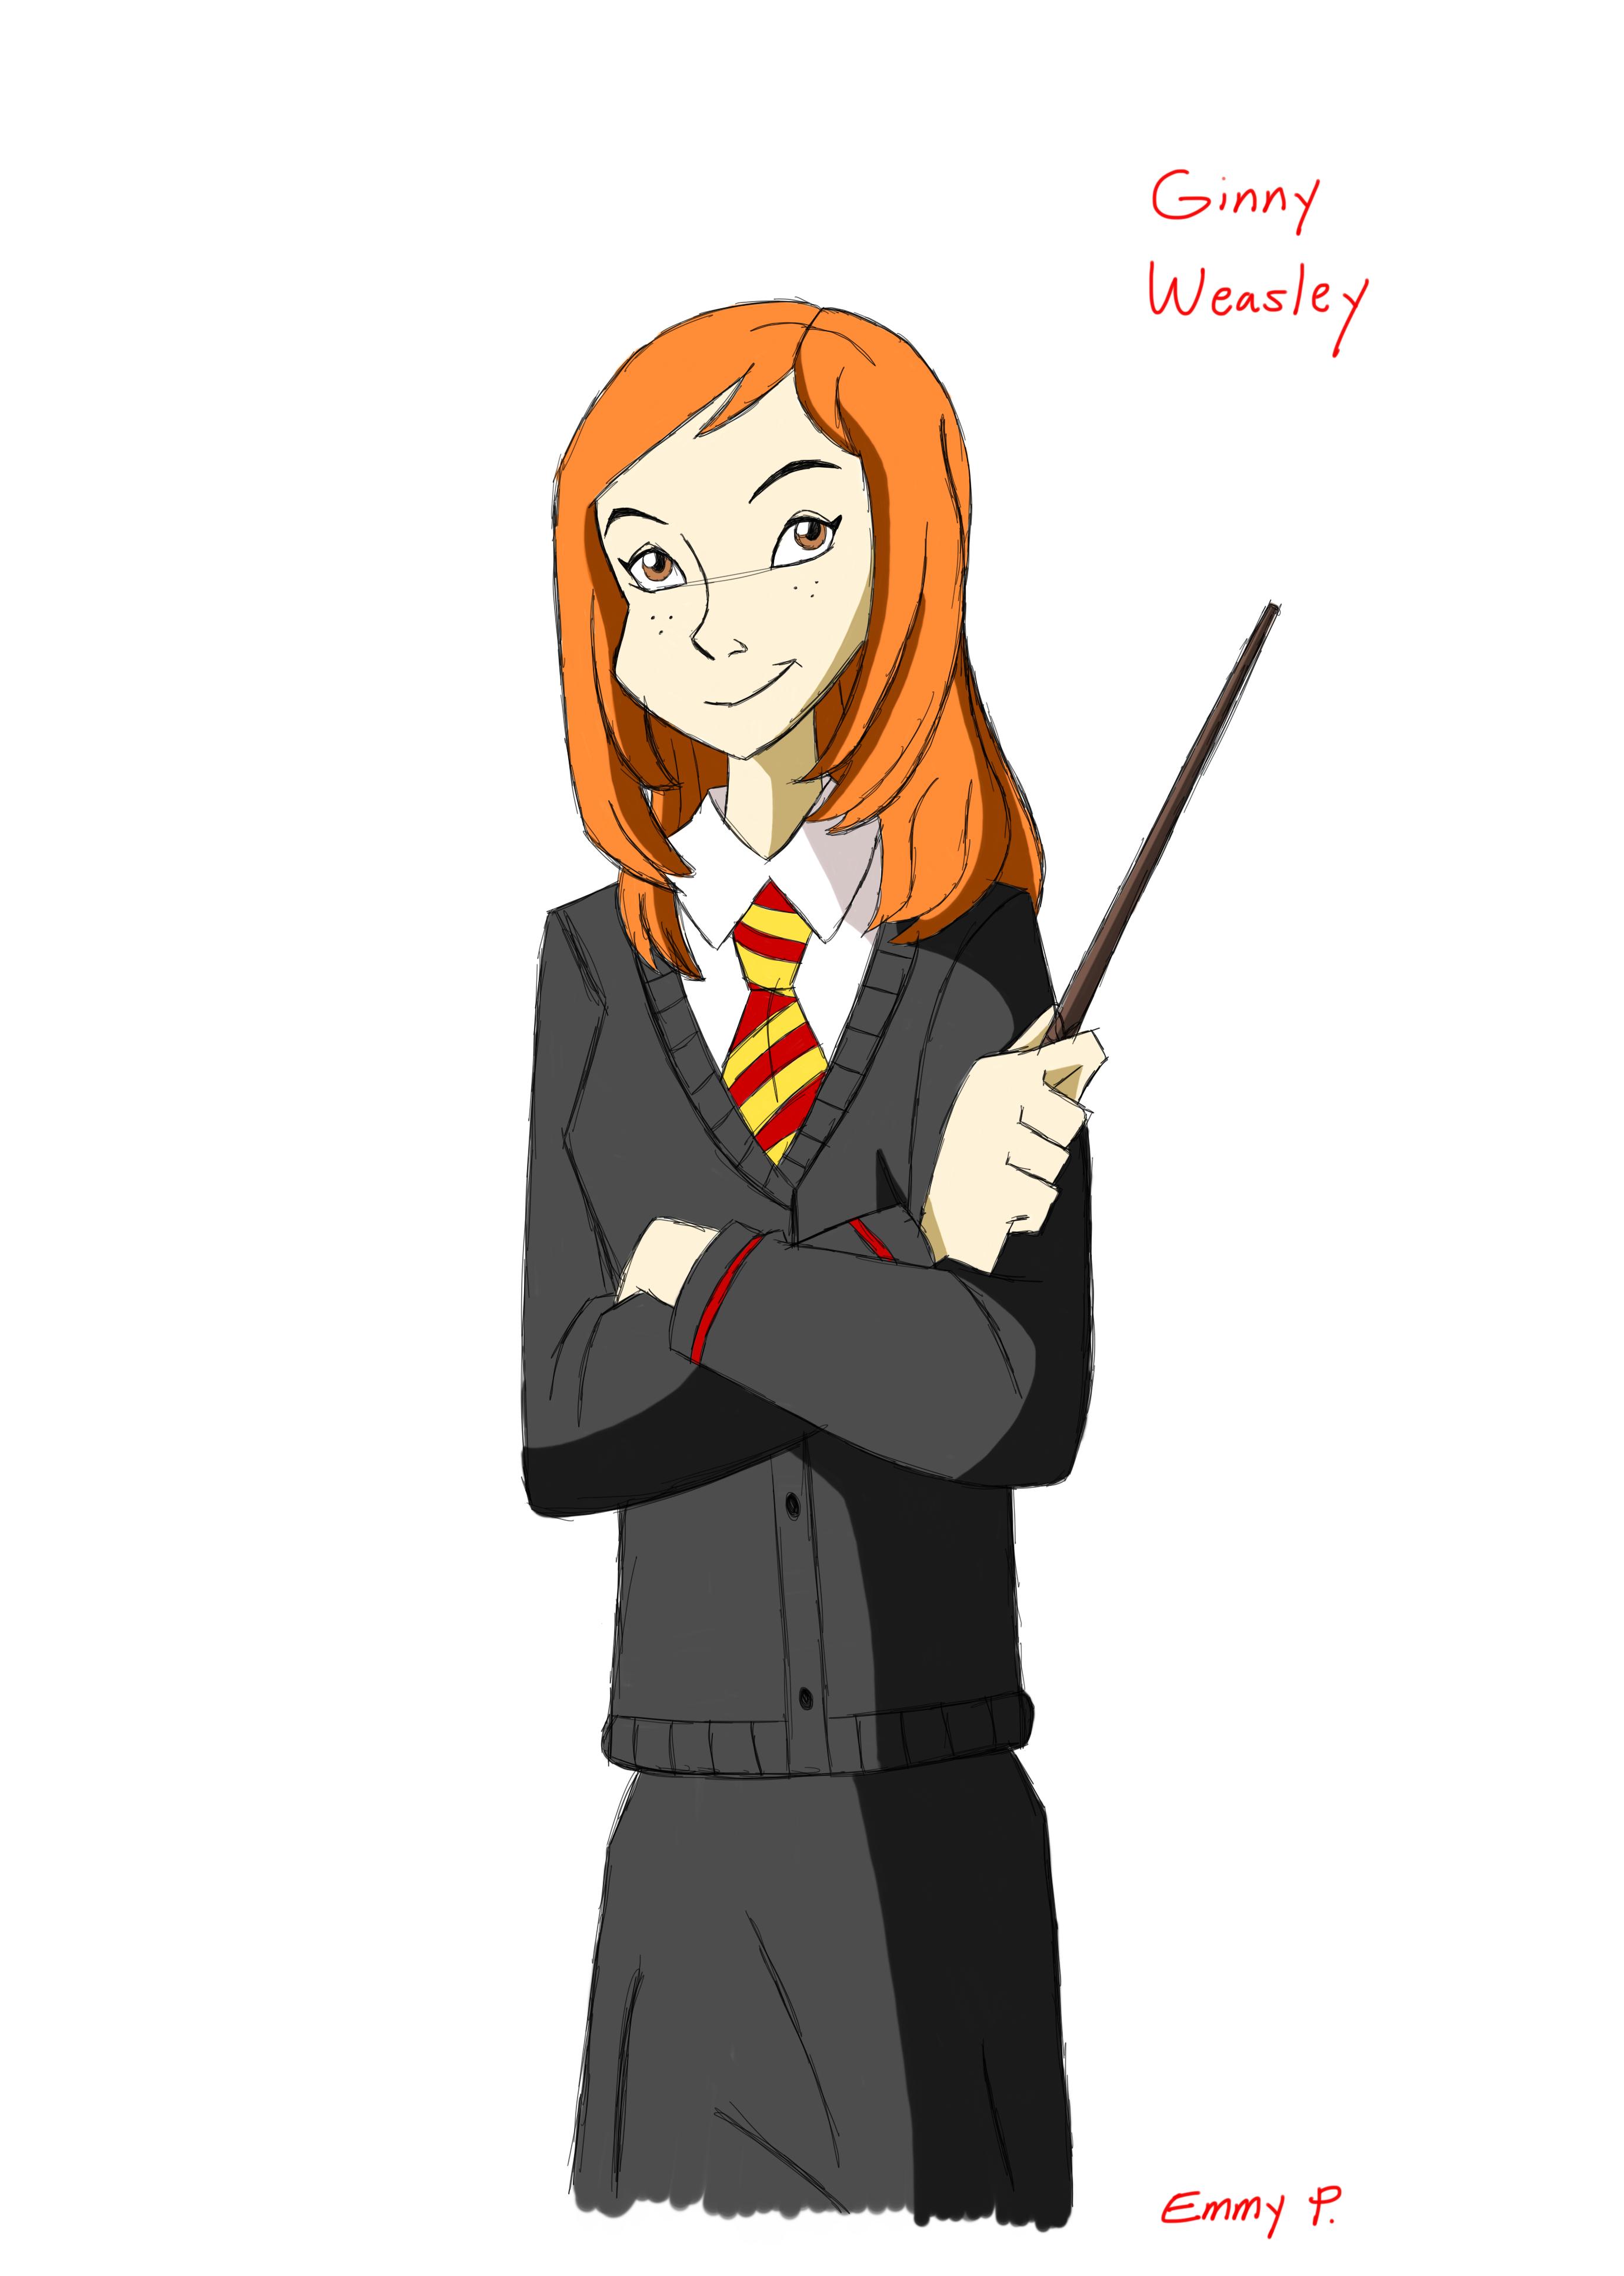 1st Ginny drawing (color) JPEG